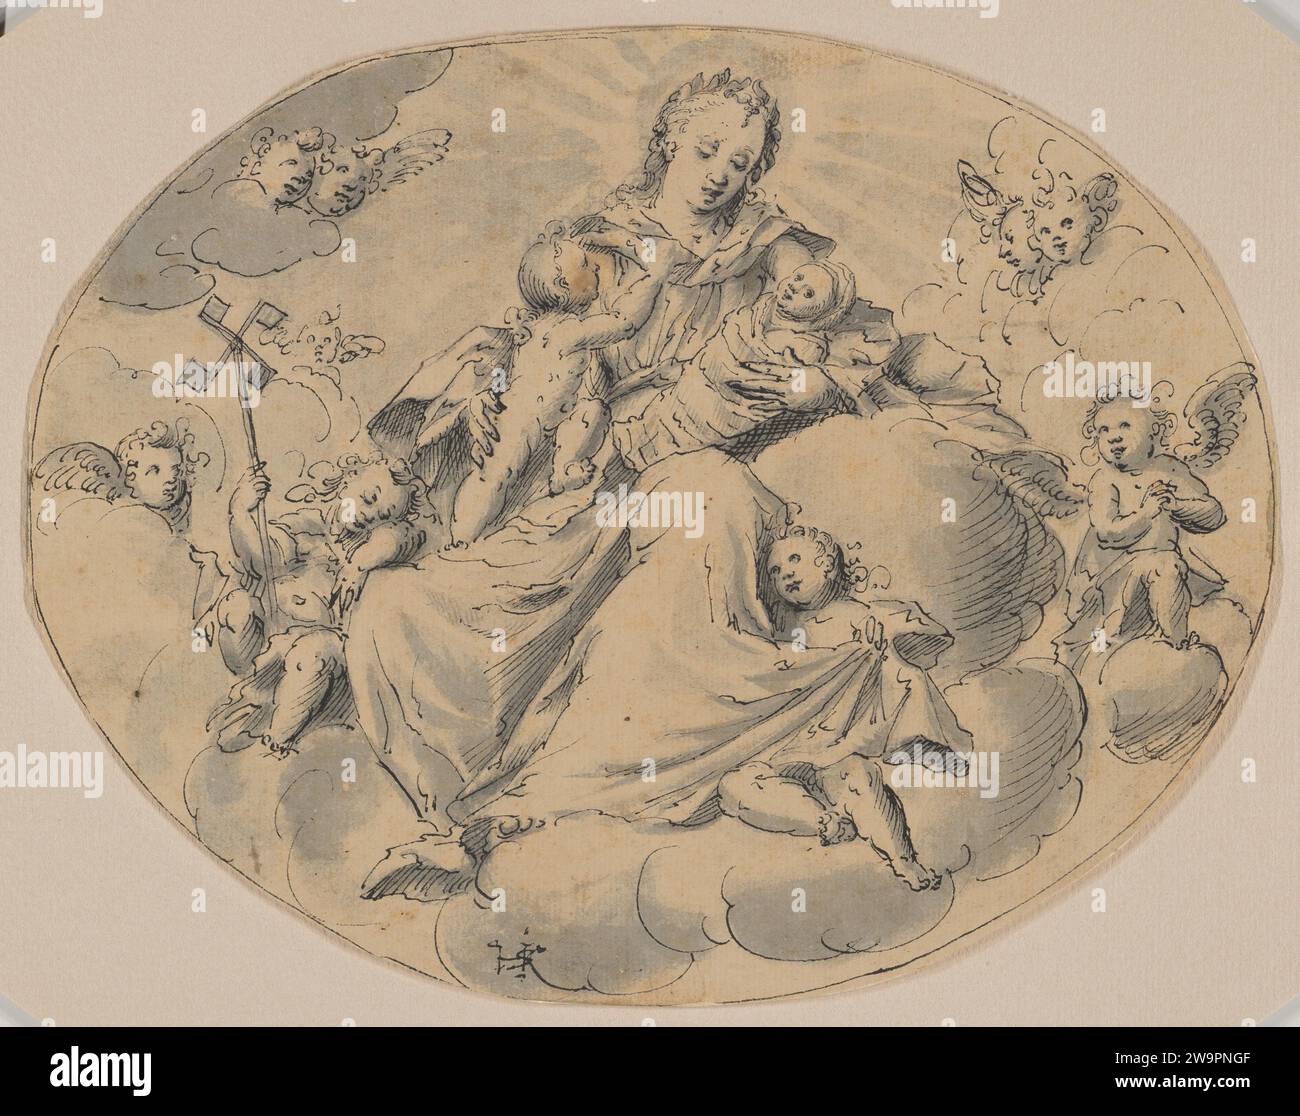 A Personification of Charity Seated on a Cloud, Surrounded by Putti 2014 by Friedrich Sustris Stock Photo